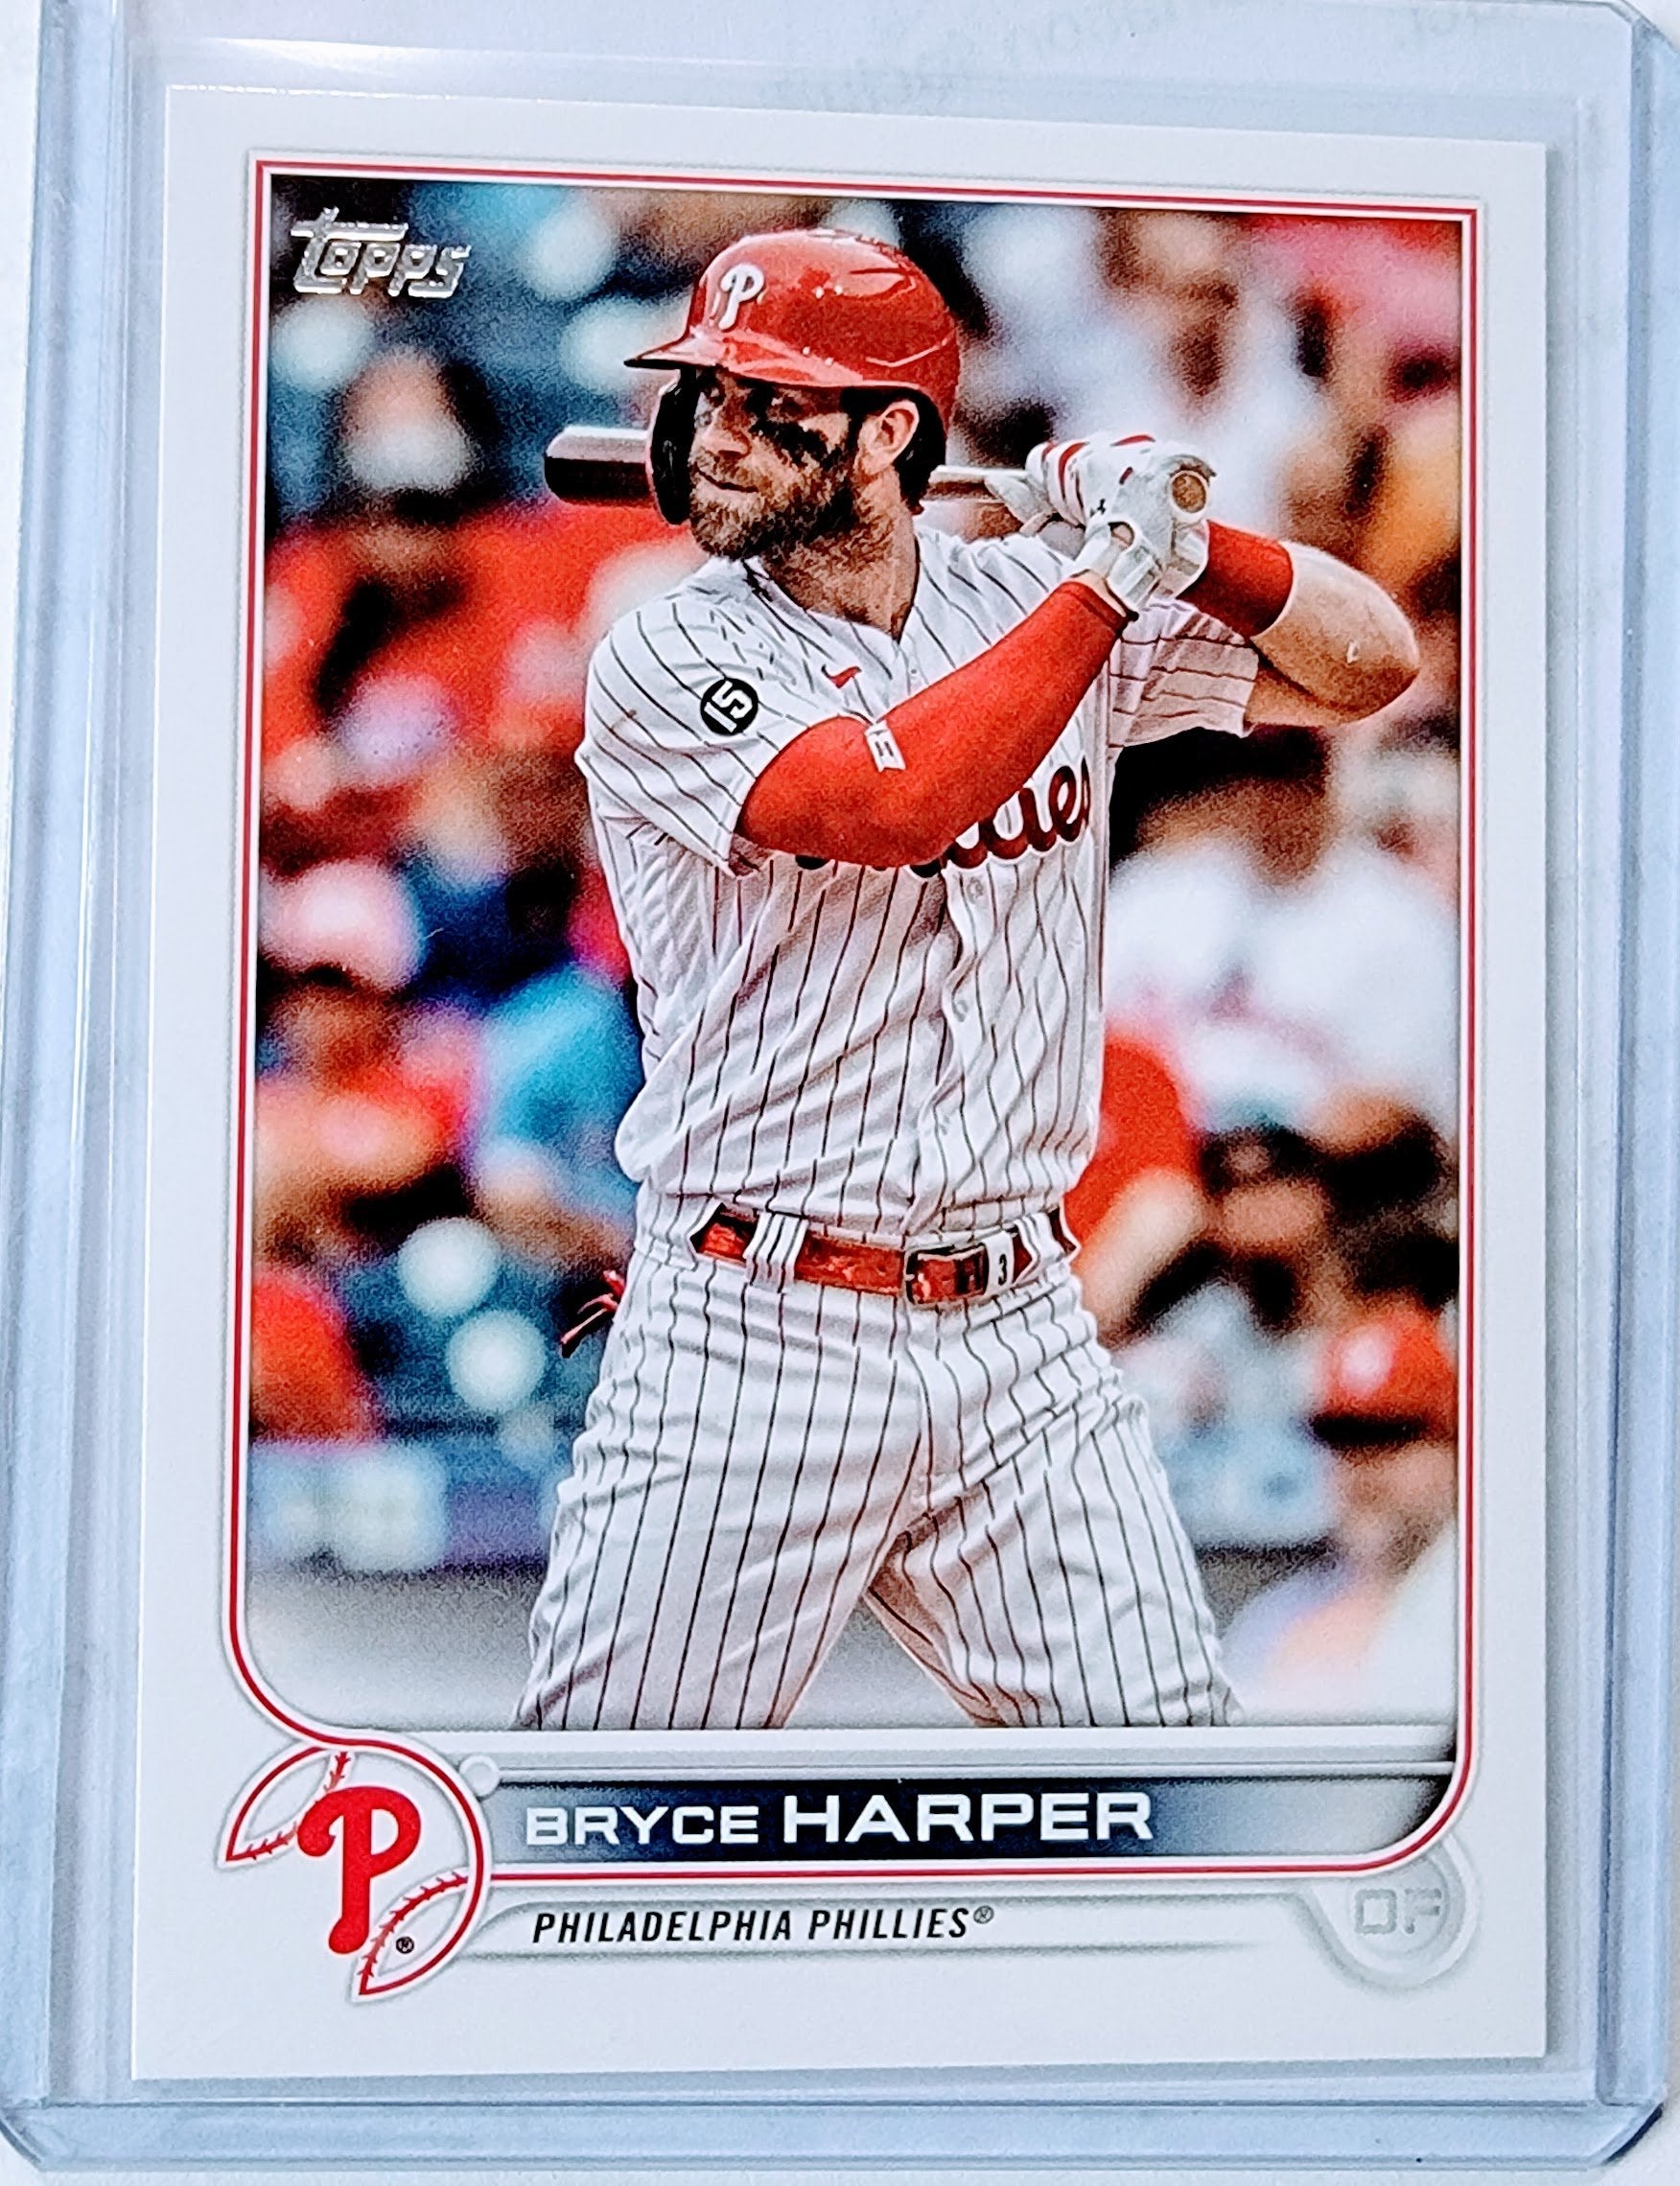 2022 Topps Bryce Harper Baseball Trading Card GRB1 simple Xclusive Collectibles   